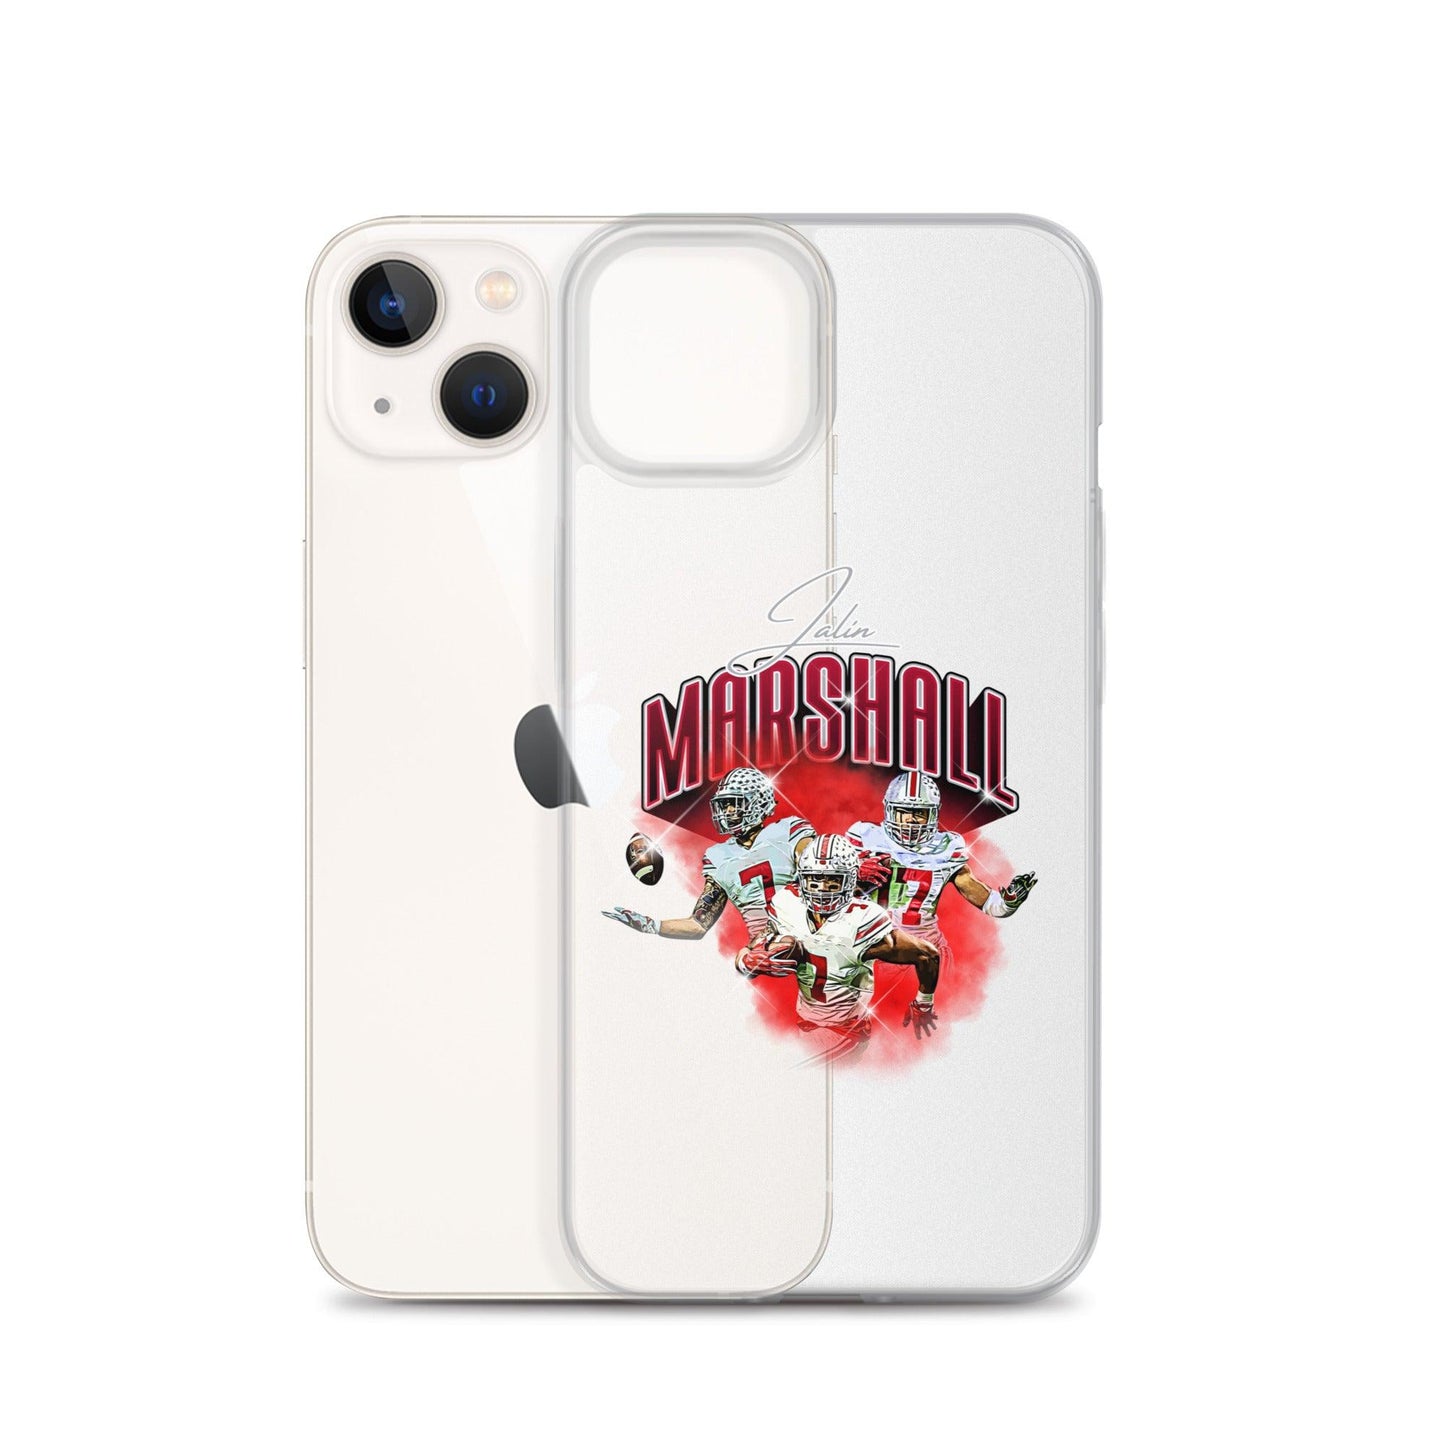 Jalin Marshall "Vintage" iPhone Case - Fan Arch